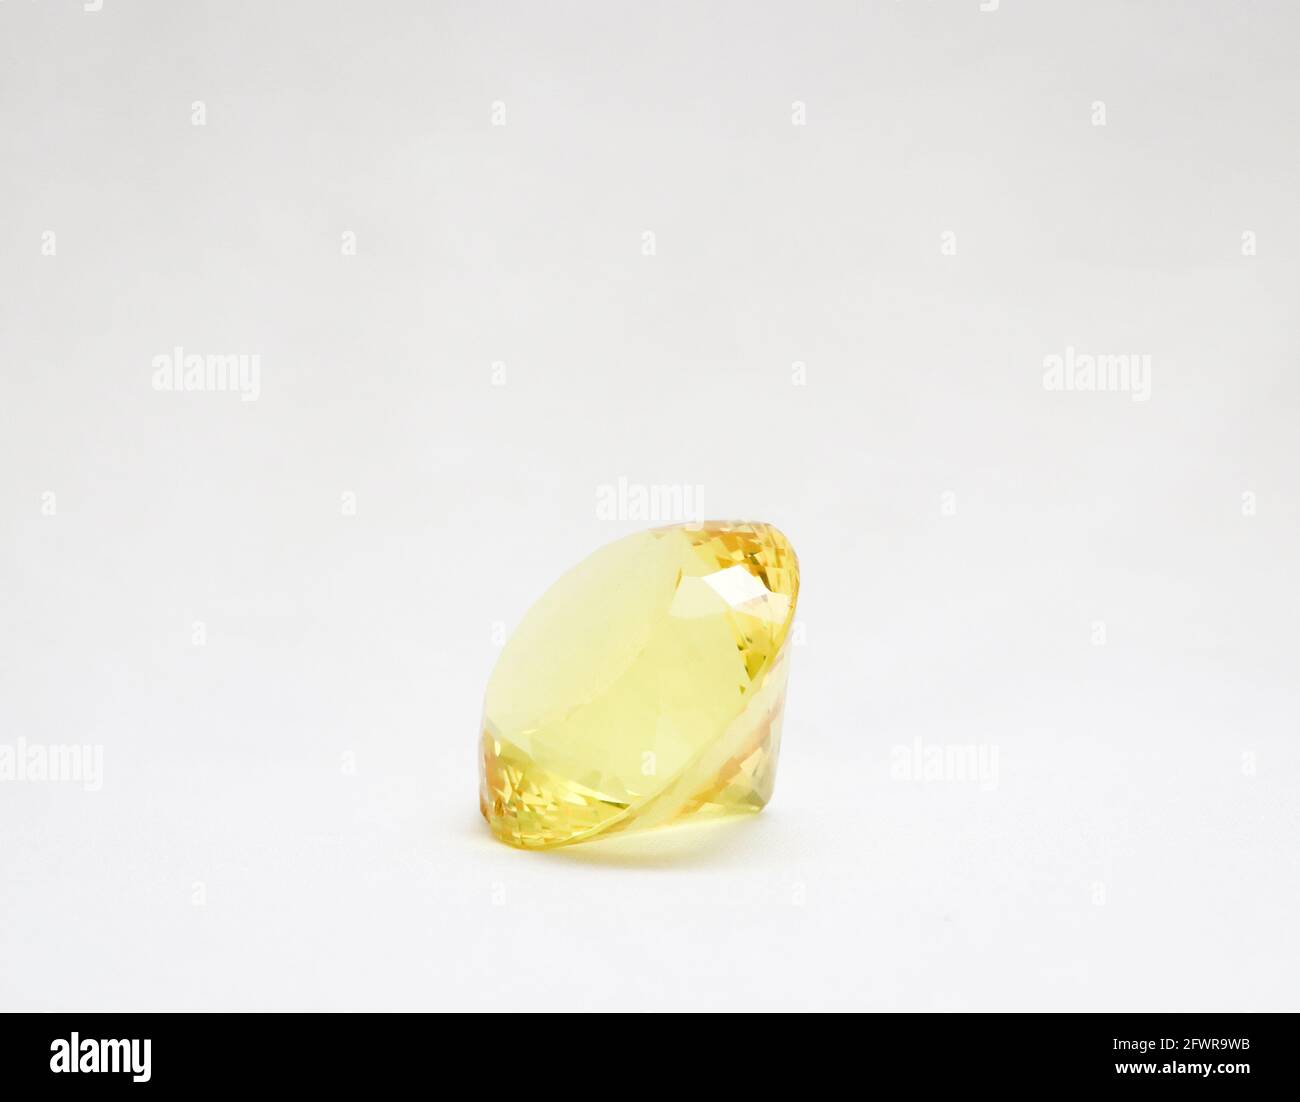 beautiful, majestic  and perfectly cut yellow glass diamond isolated in a white background Stock Photo